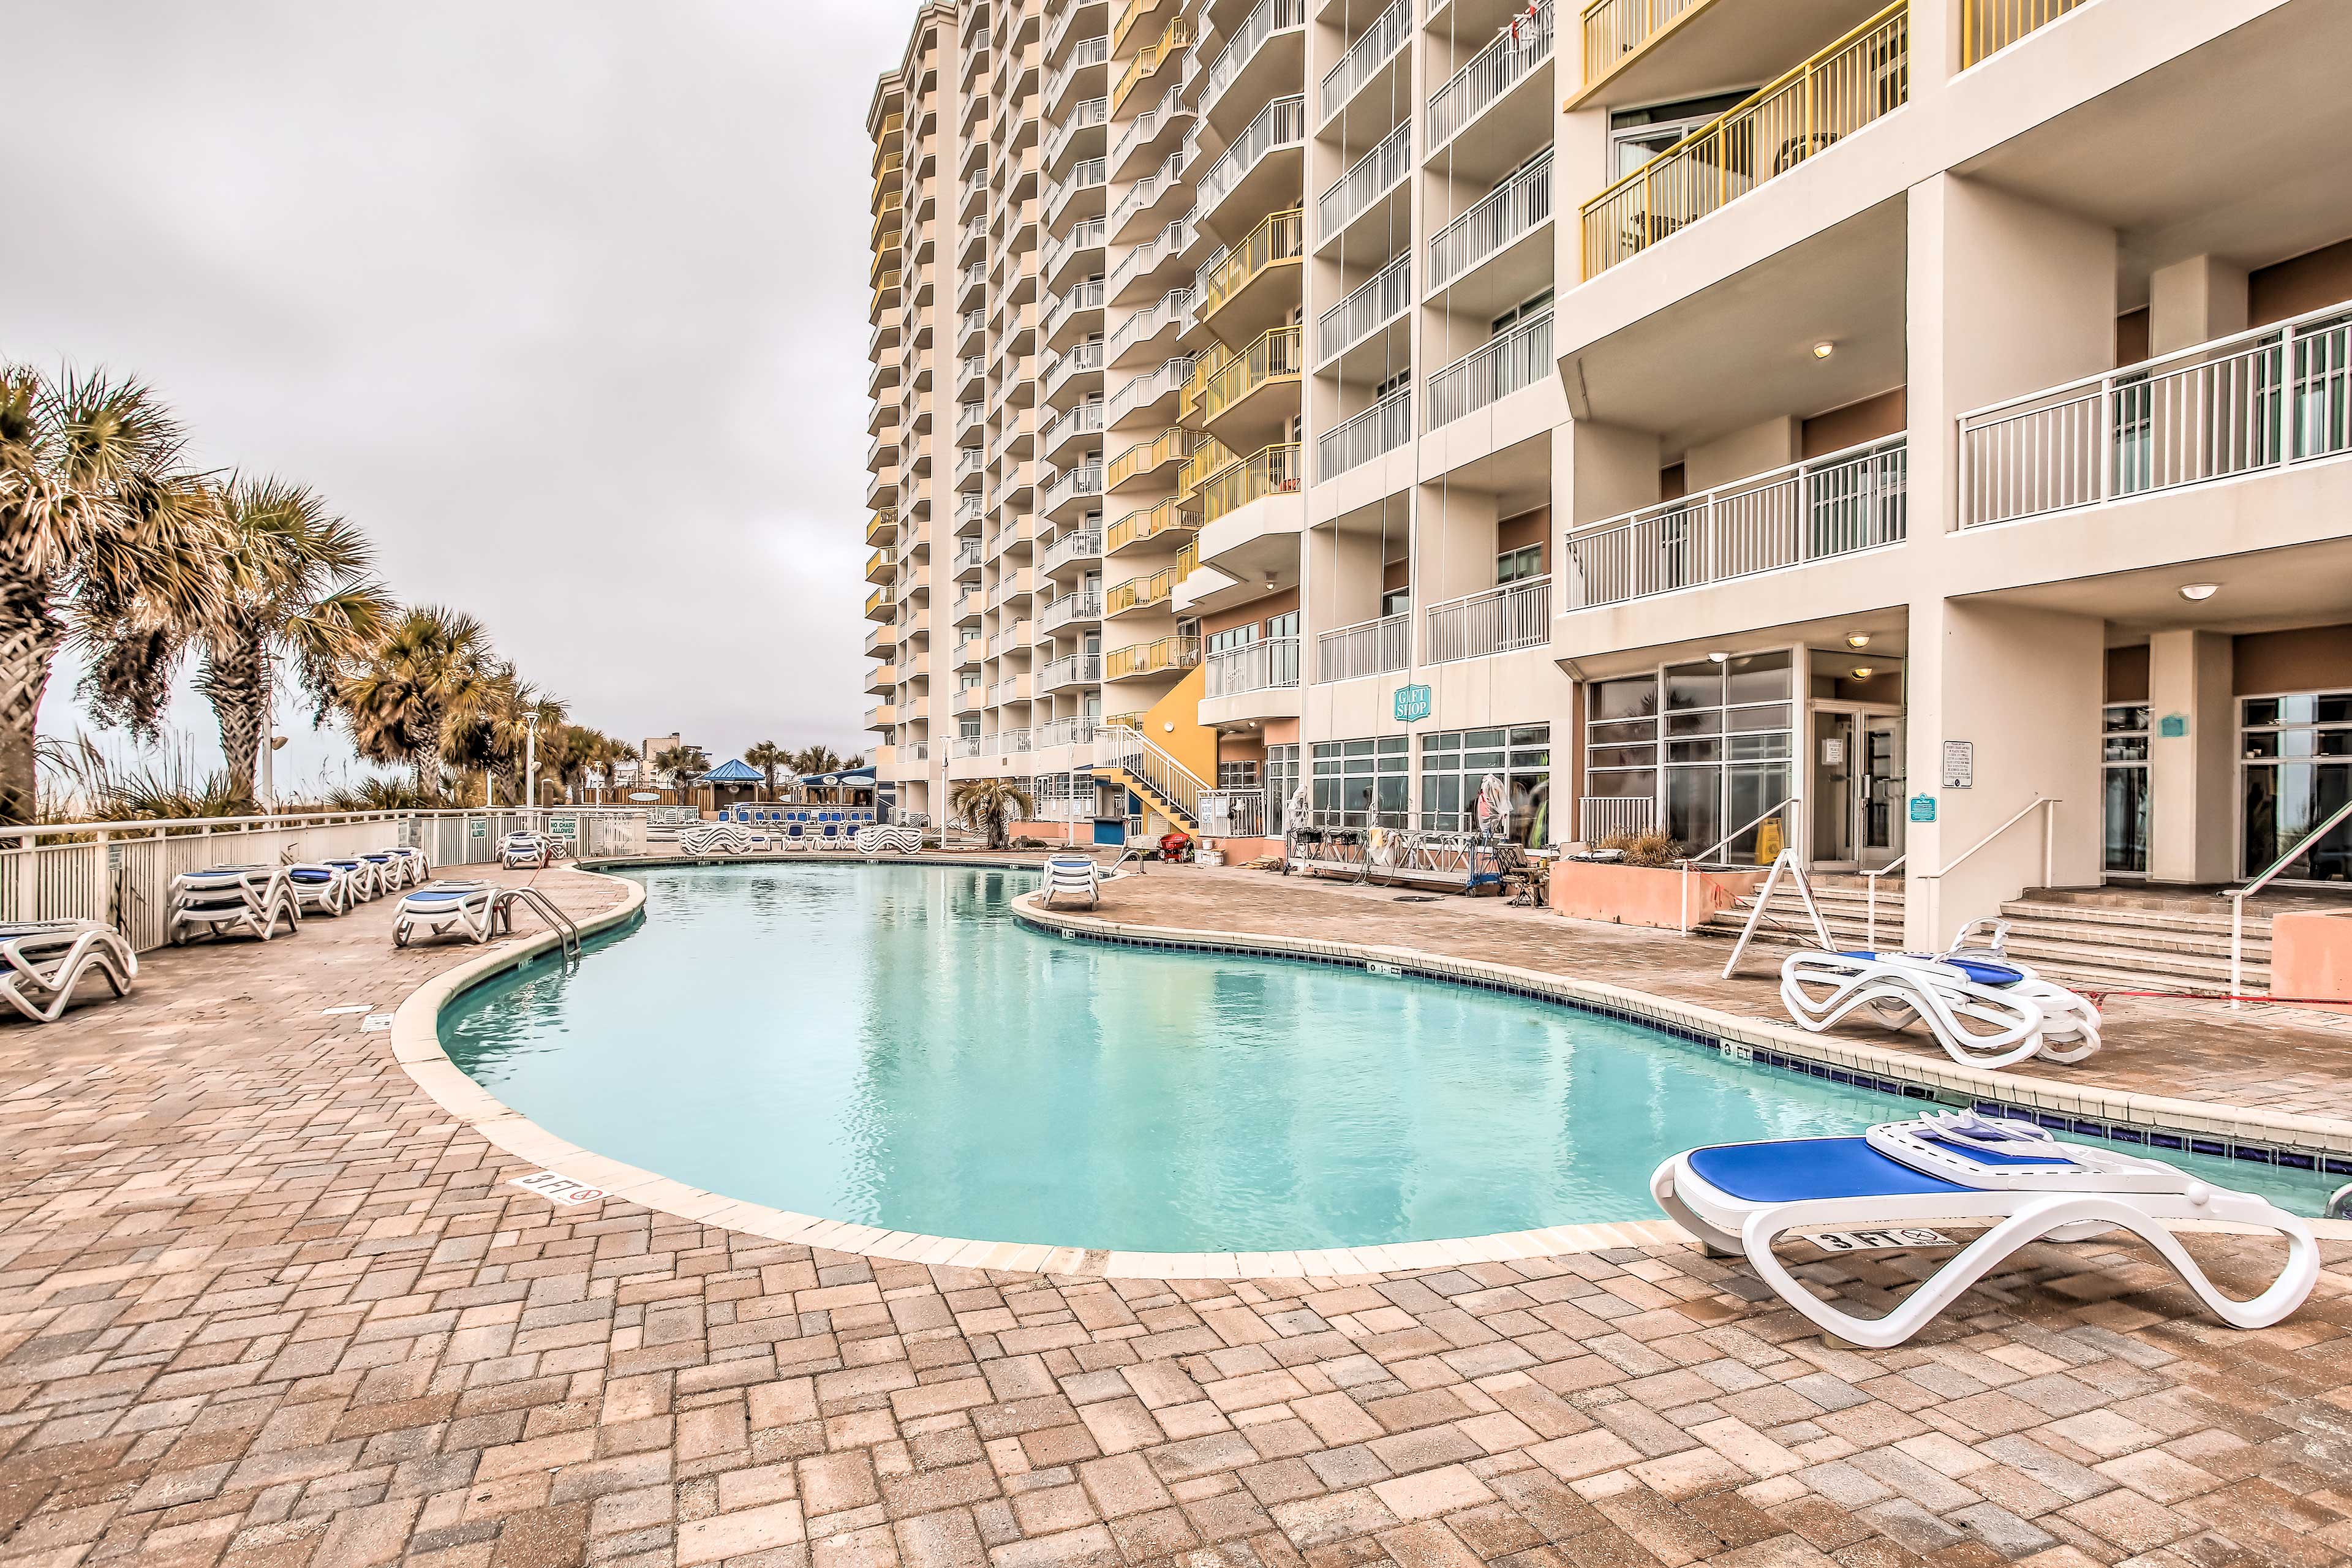 North Myrtle Beach Vacation Rental | 1BR | 1BA | 608 Sq Ft | Step-Free Access